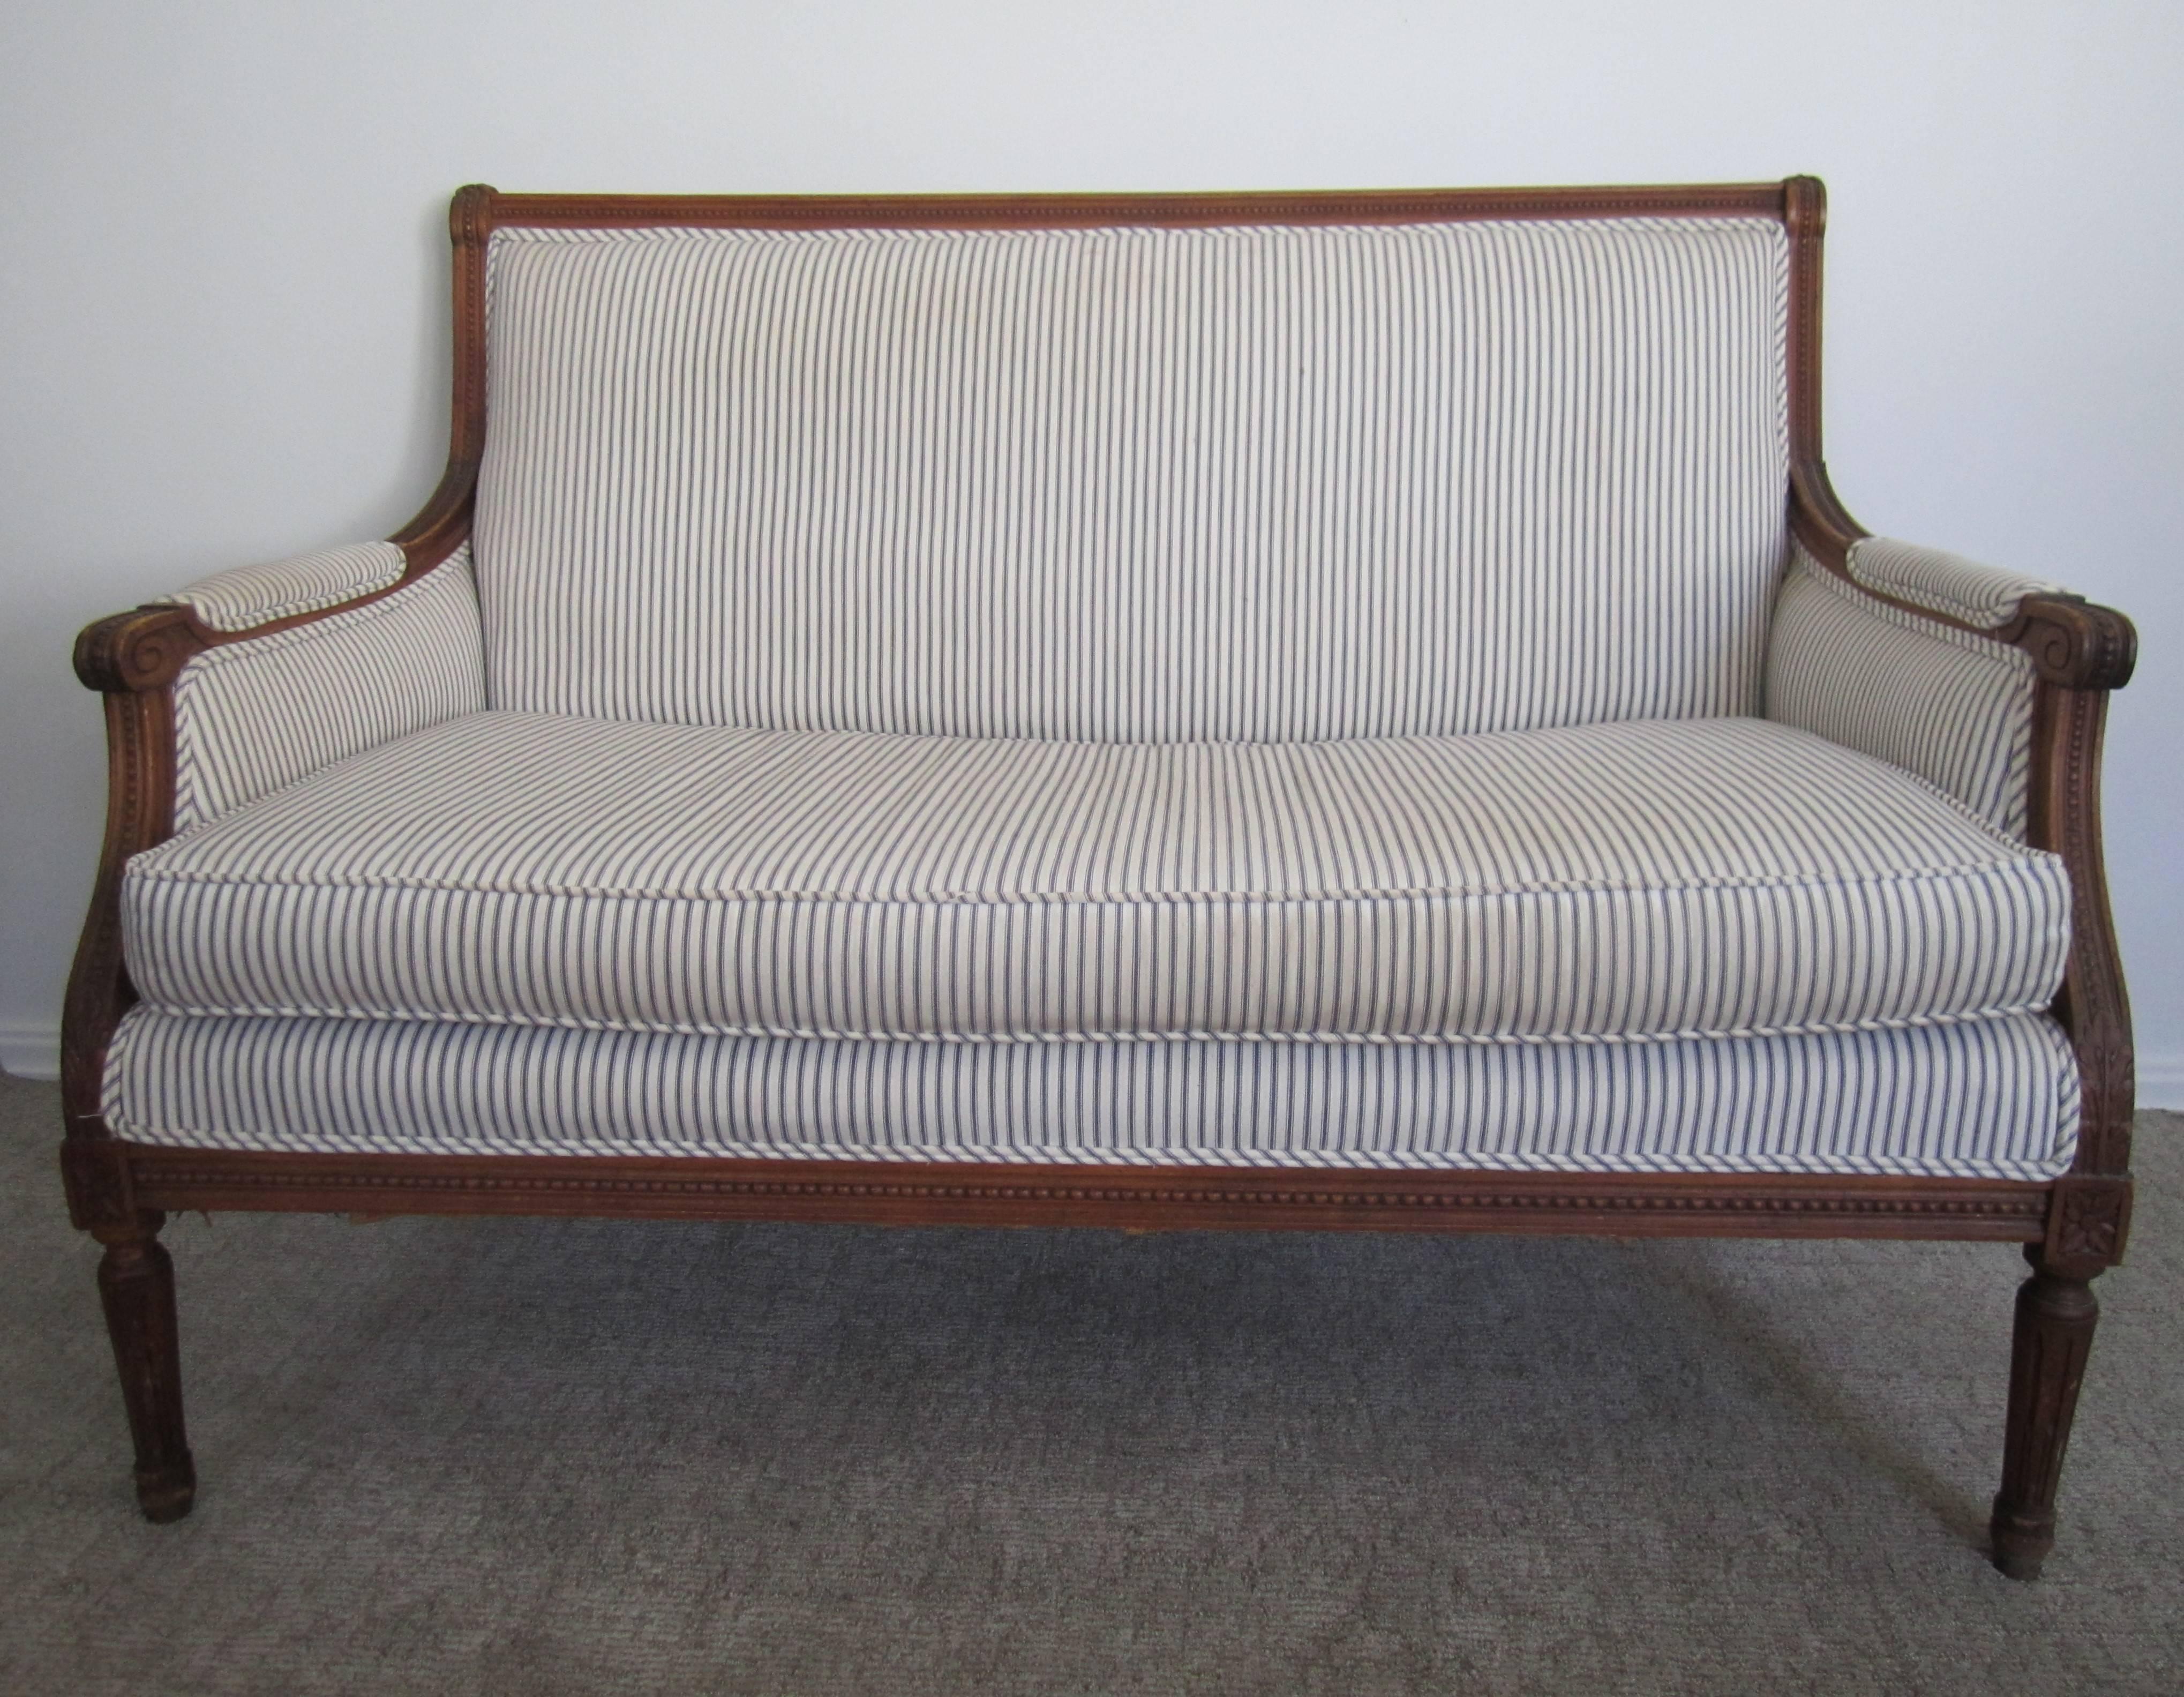 A beautiful antique French Louis XVI style settee sofa upholstered, front, back and sides, in a blue and white ticking fabric. Solid wood frame. Measurements include: 46